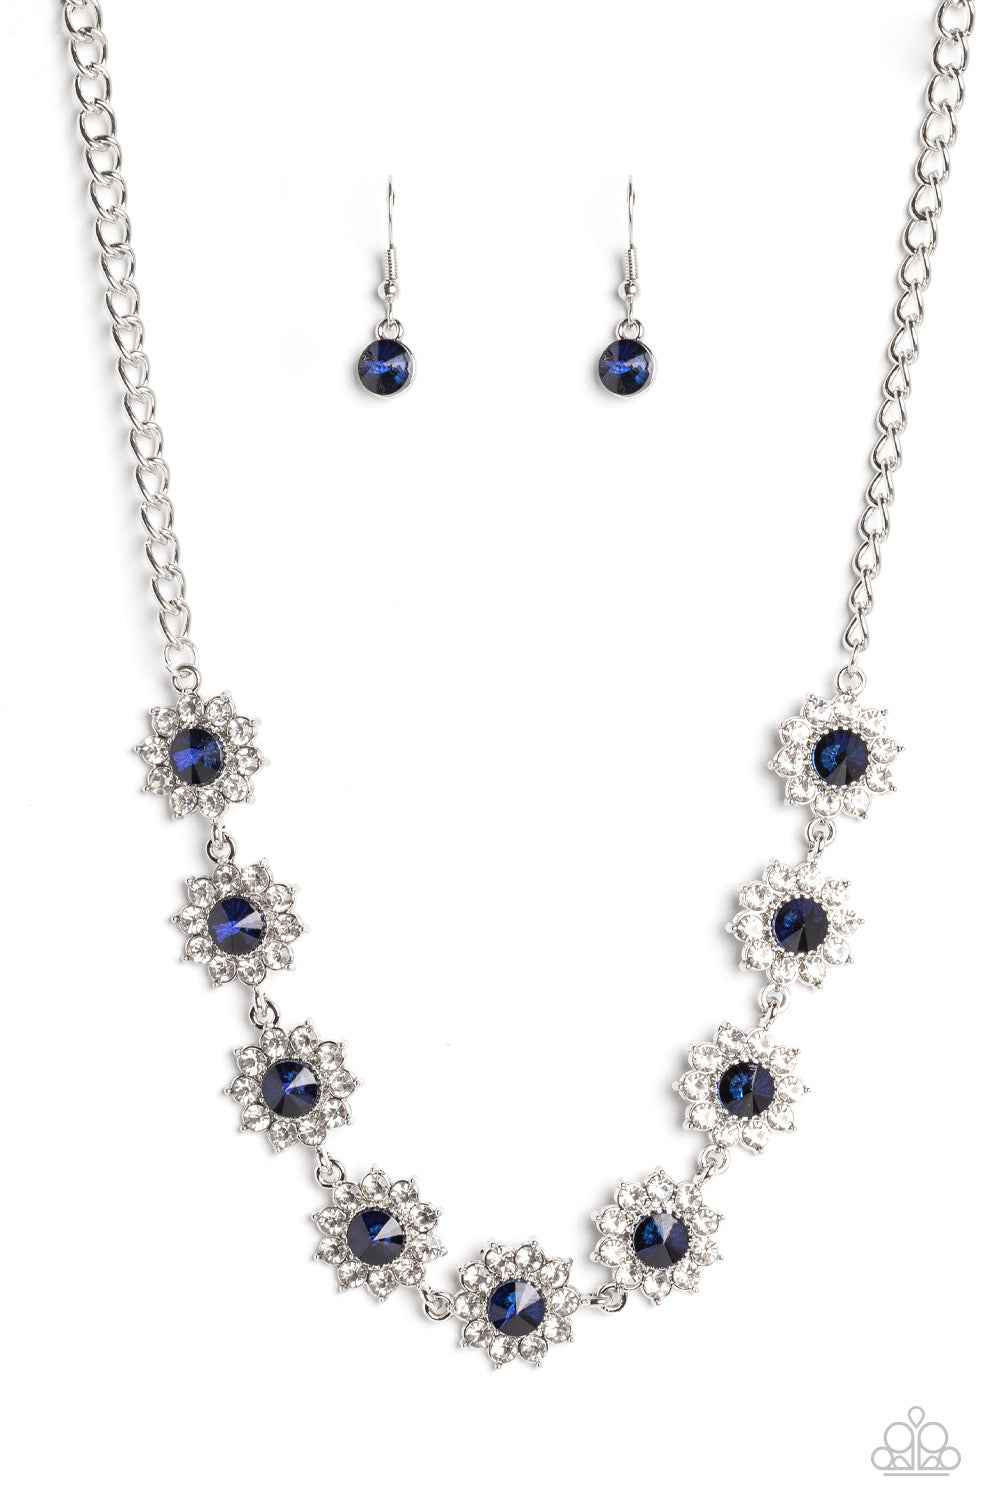 Paparazzi Blooming Brilliance - Blue Necklace -Paparazzi Jewelry Images 